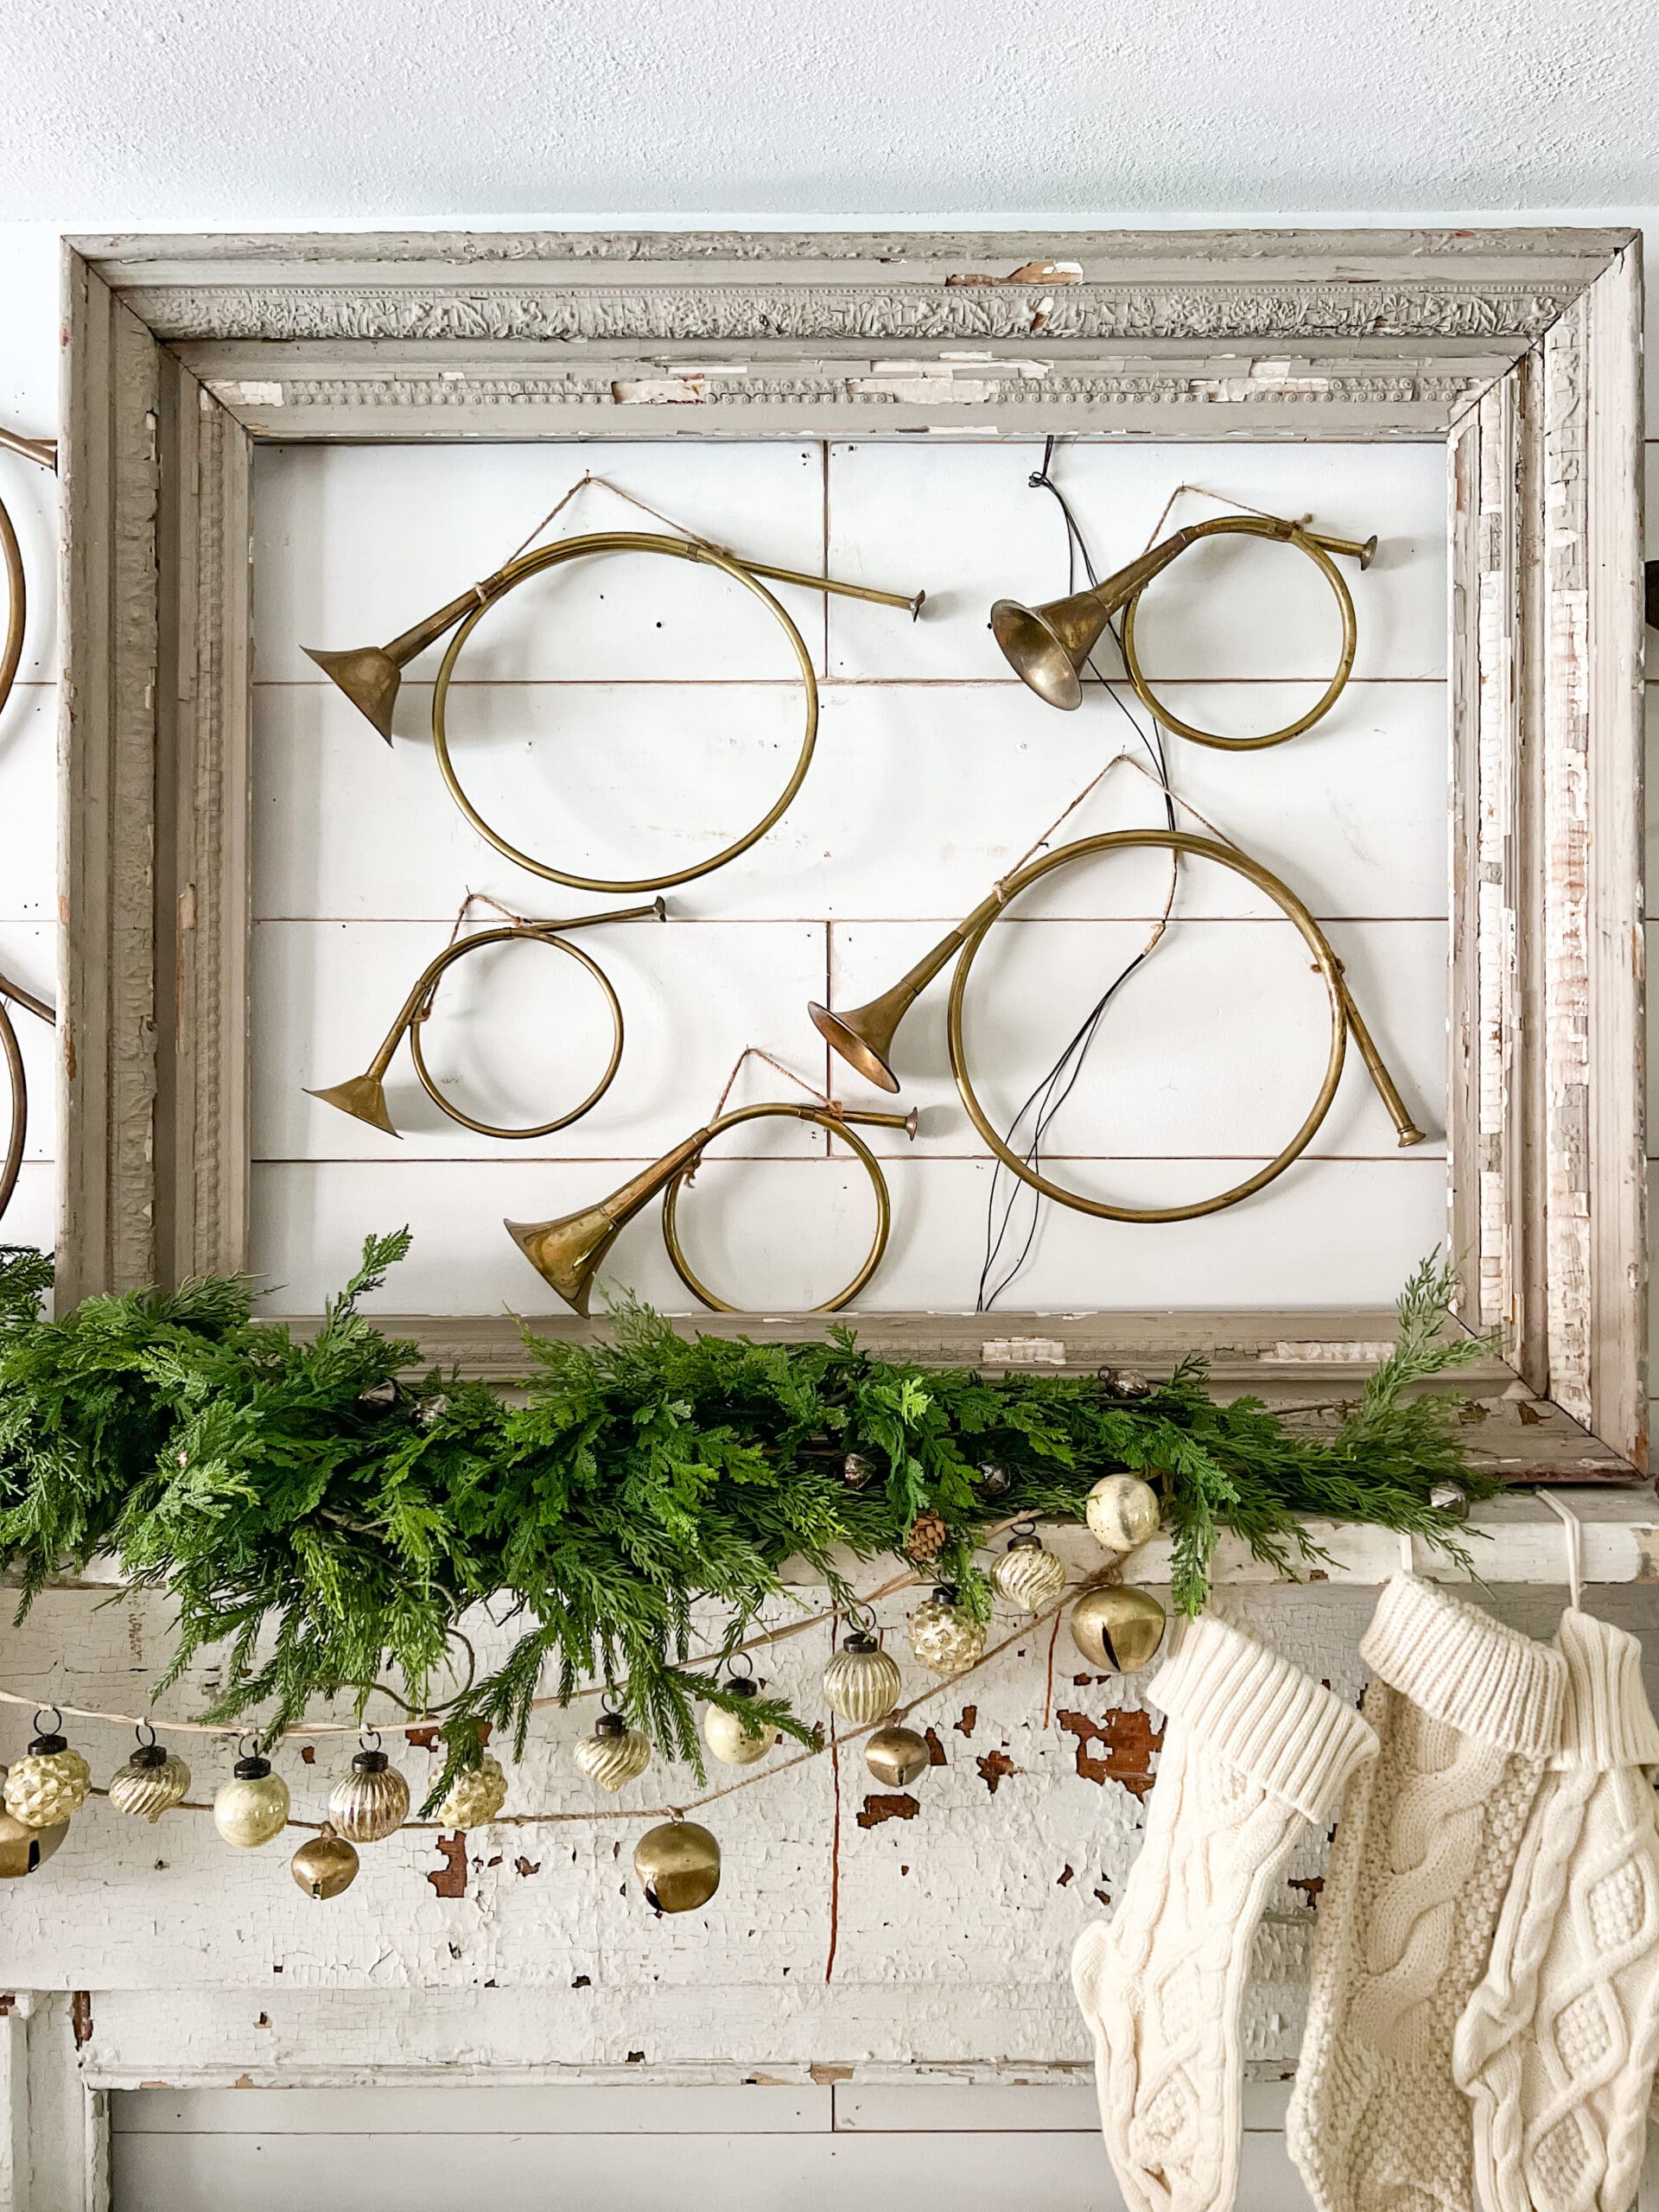 smaller French horns hung on a wall inside of a large gray frame